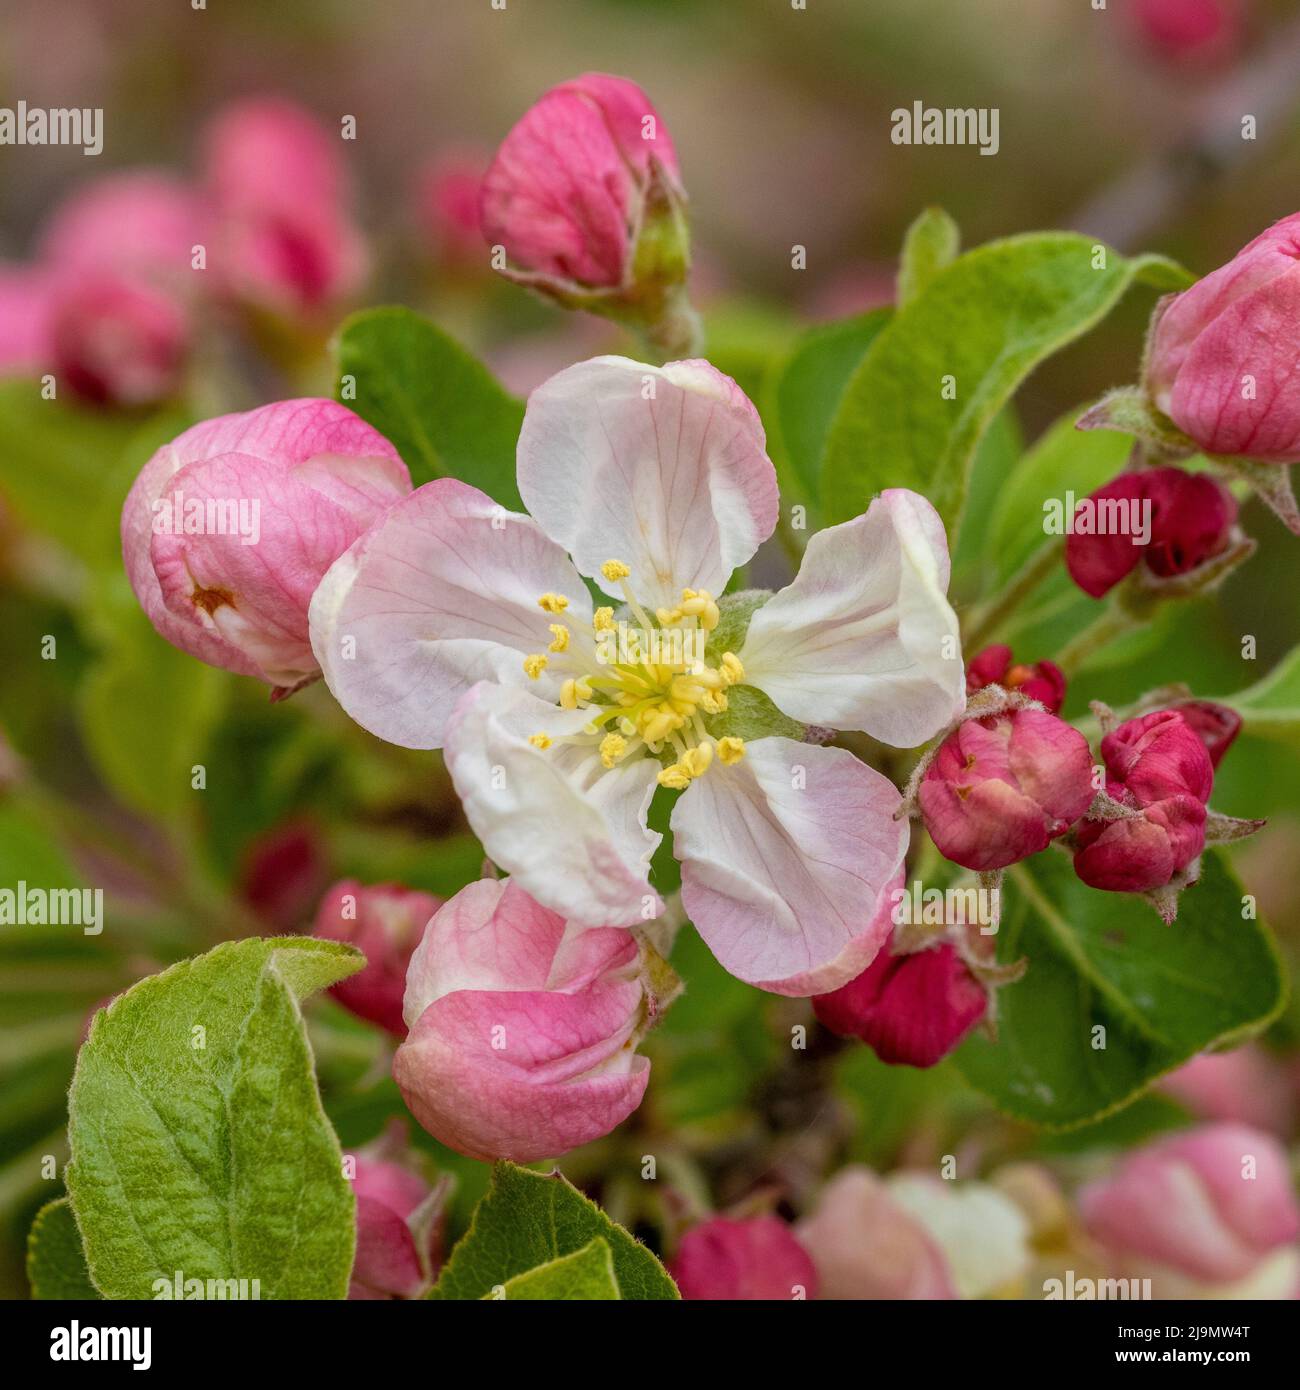 White tinged with pink blossom on crab apple tree. Malus 'Evereste' Stock Photo